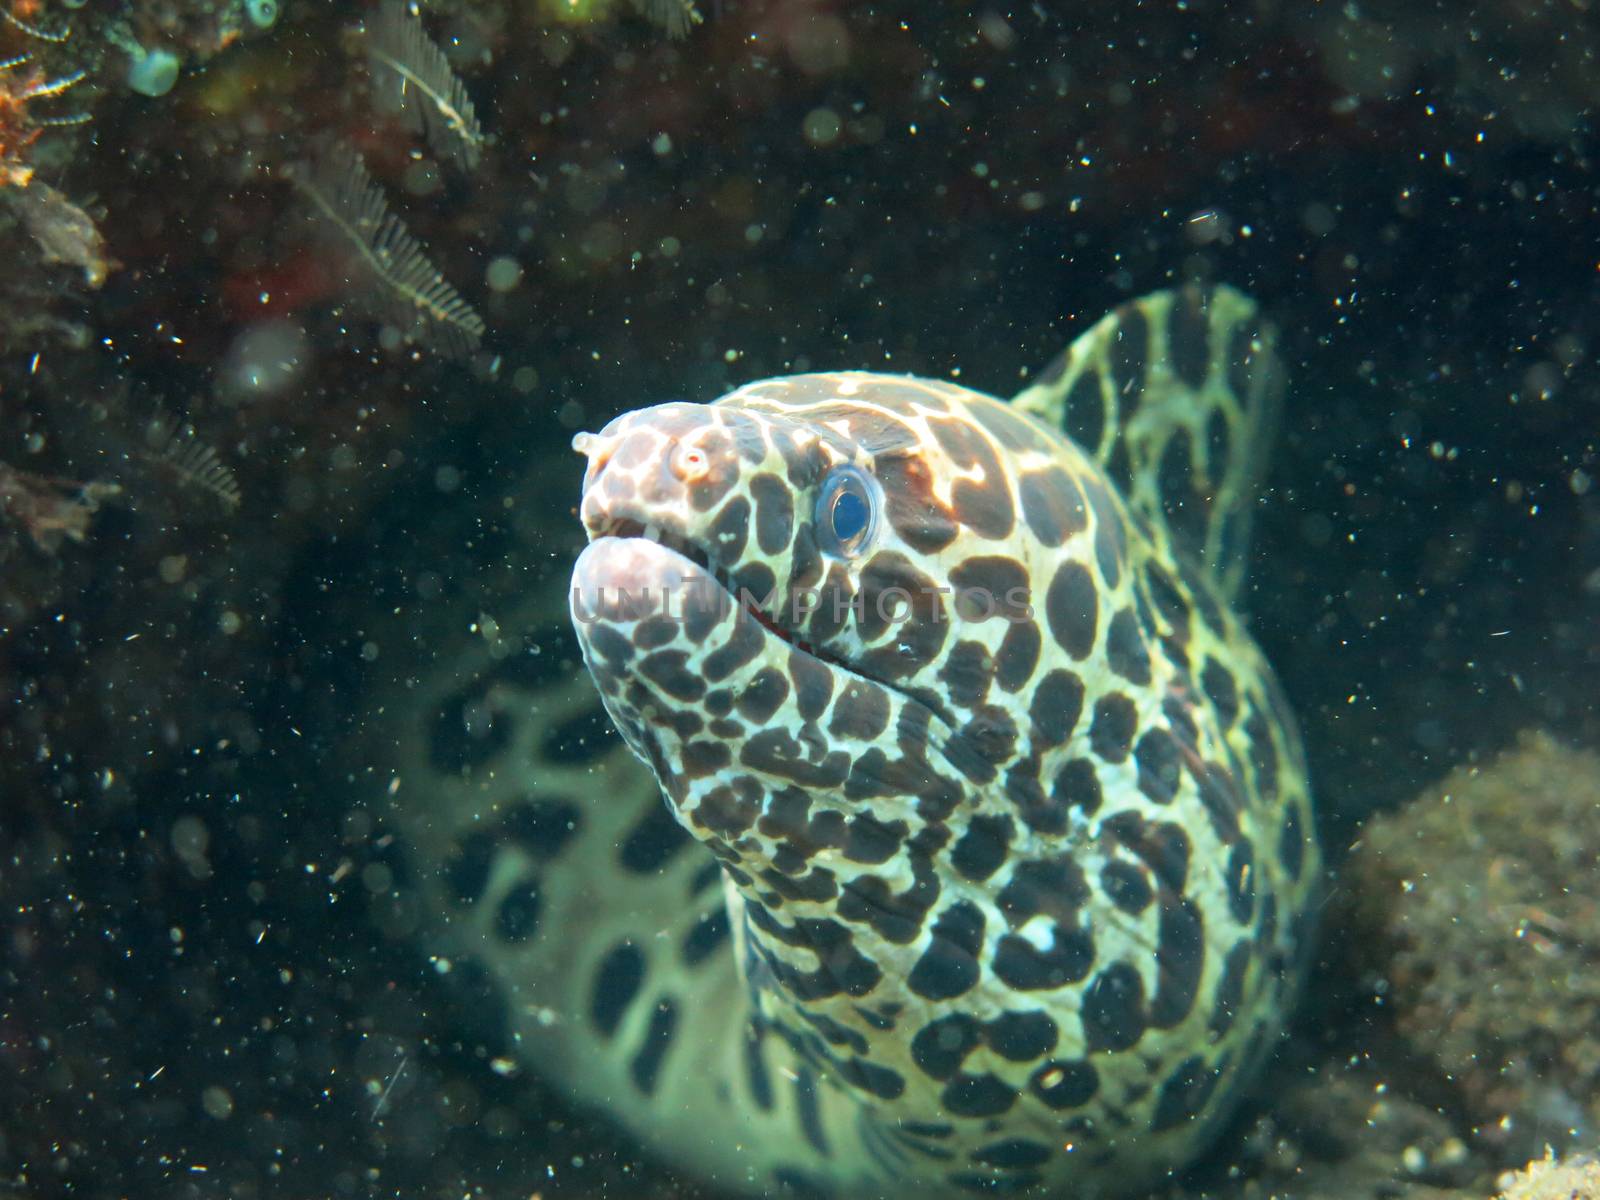 Giant spotted moray hiding amongst coral reef on the ocean floor, Bali.